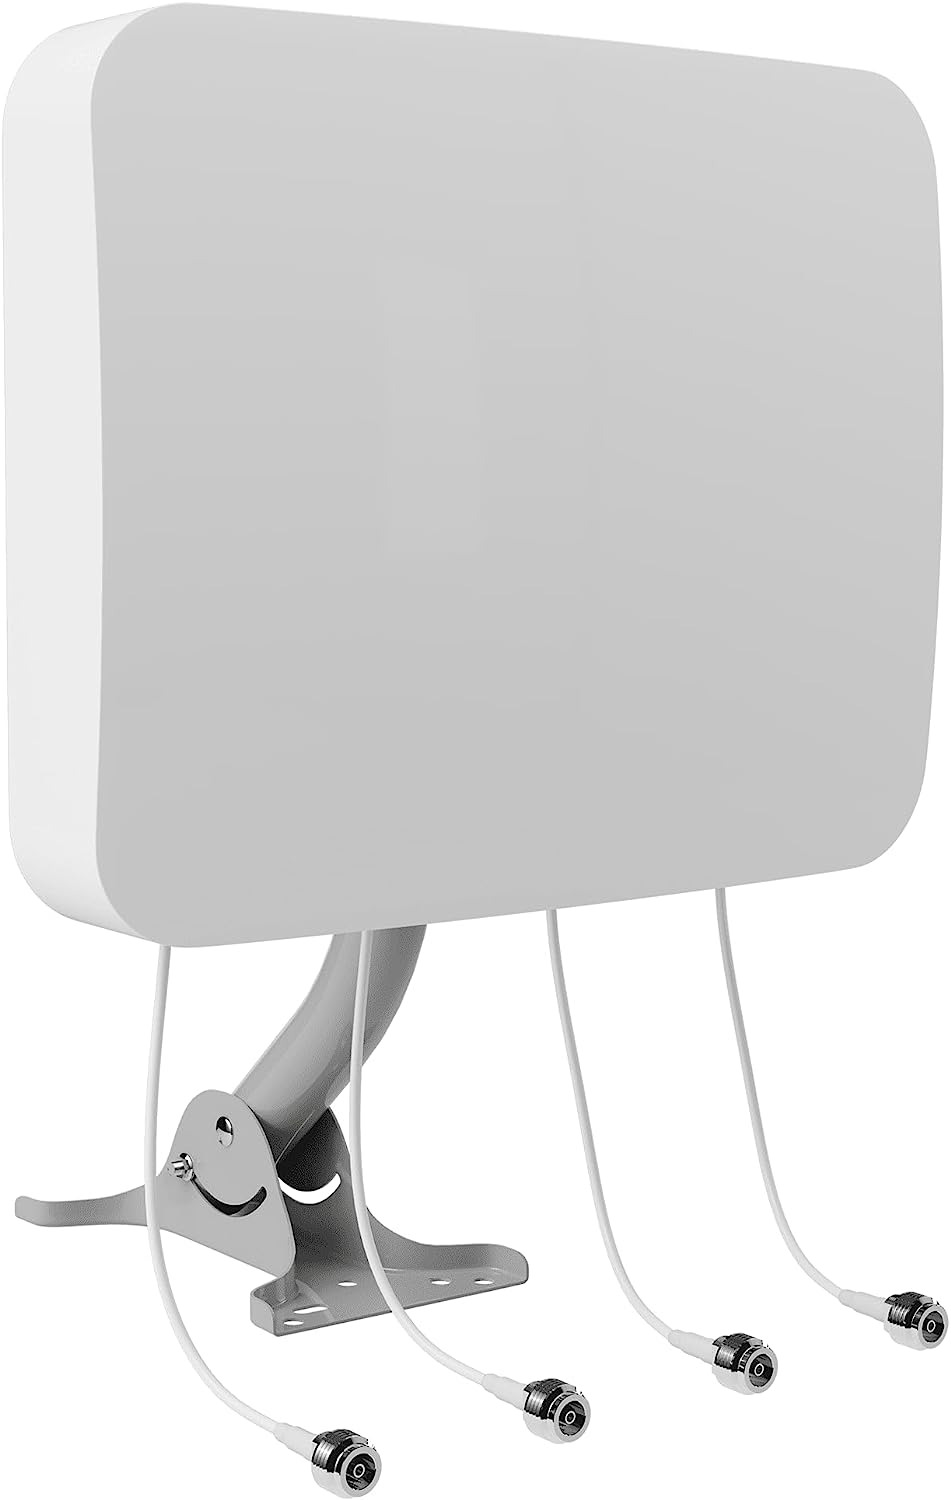 MIMO 4X4 Panel Antenna Kit for 4G & 5G Cellular Hotspots, Routers, &...